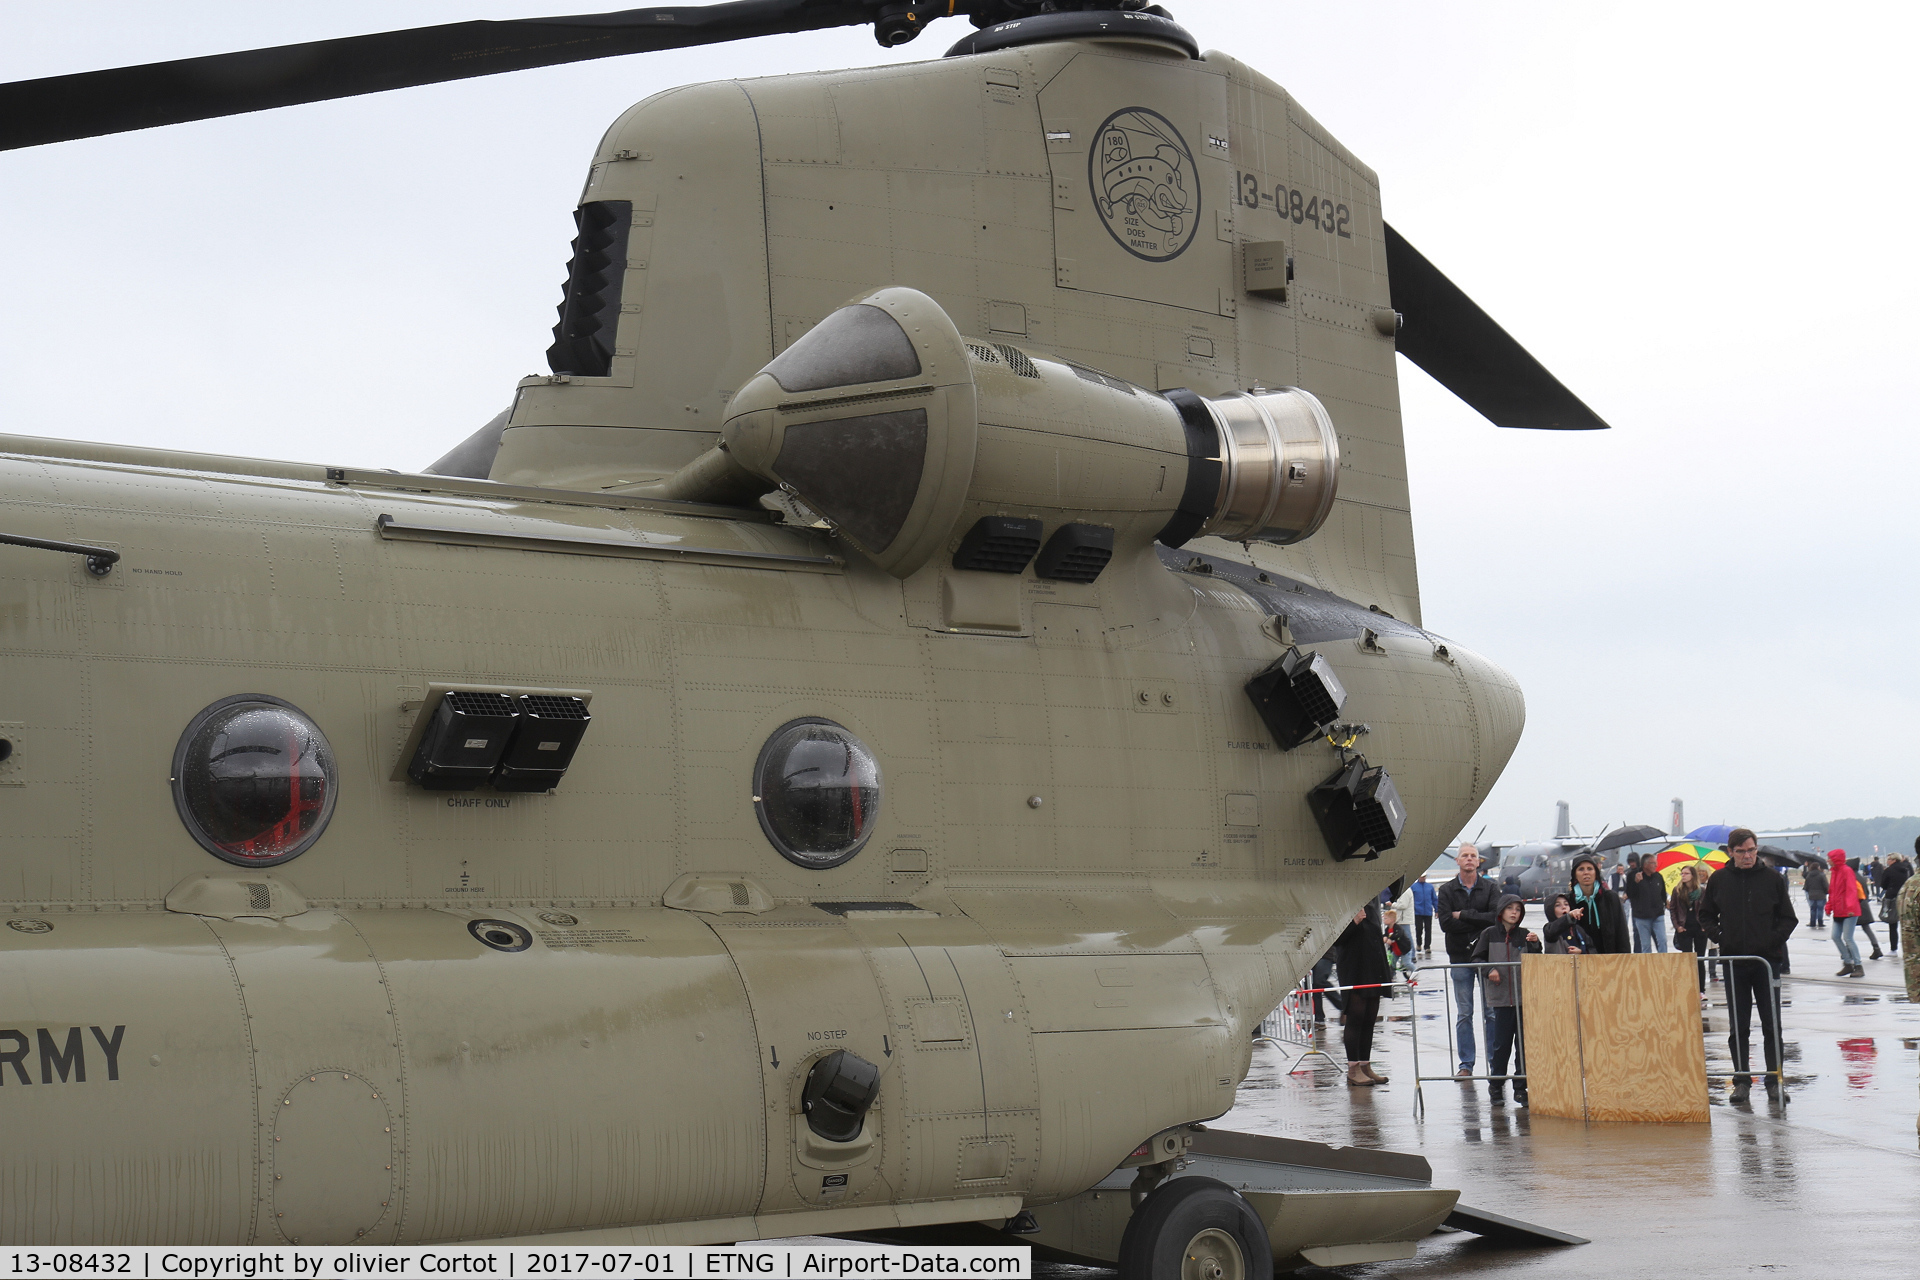 13-08432, Boeing CH-47F Chinook C/N M.8432, note the insigna on the tail